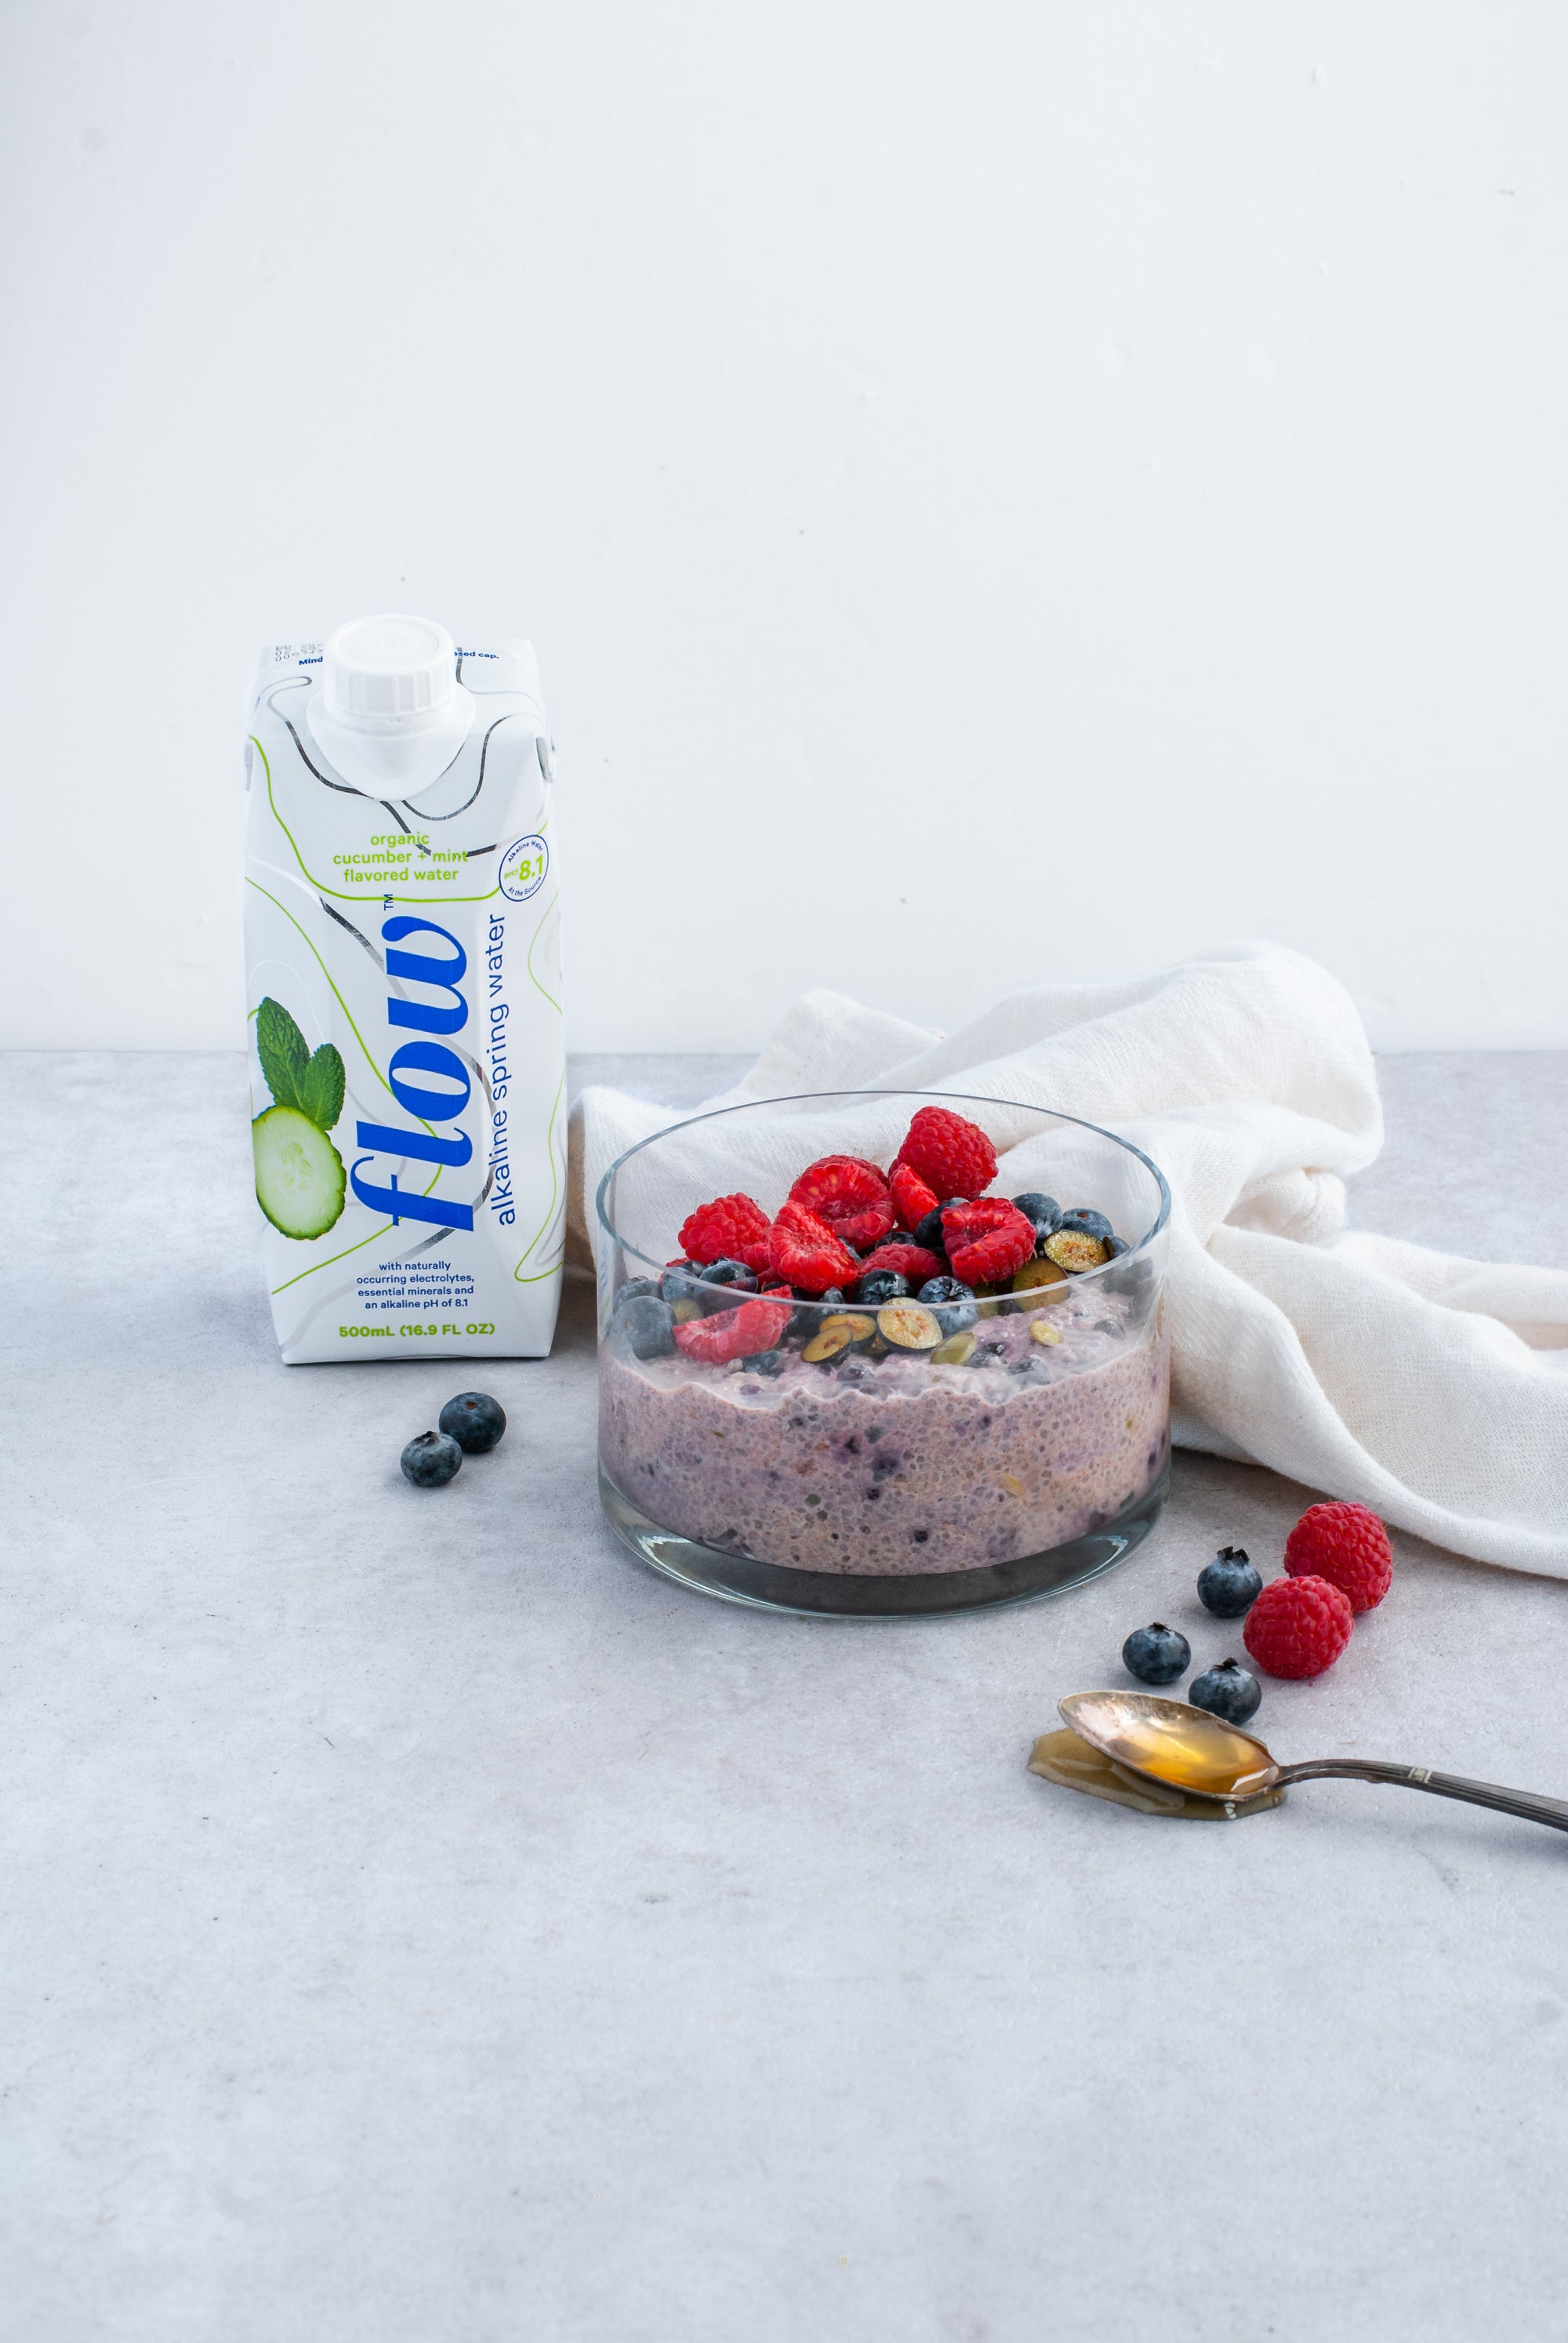 Help Balance Your Hormones With This Pudding (Recipe)